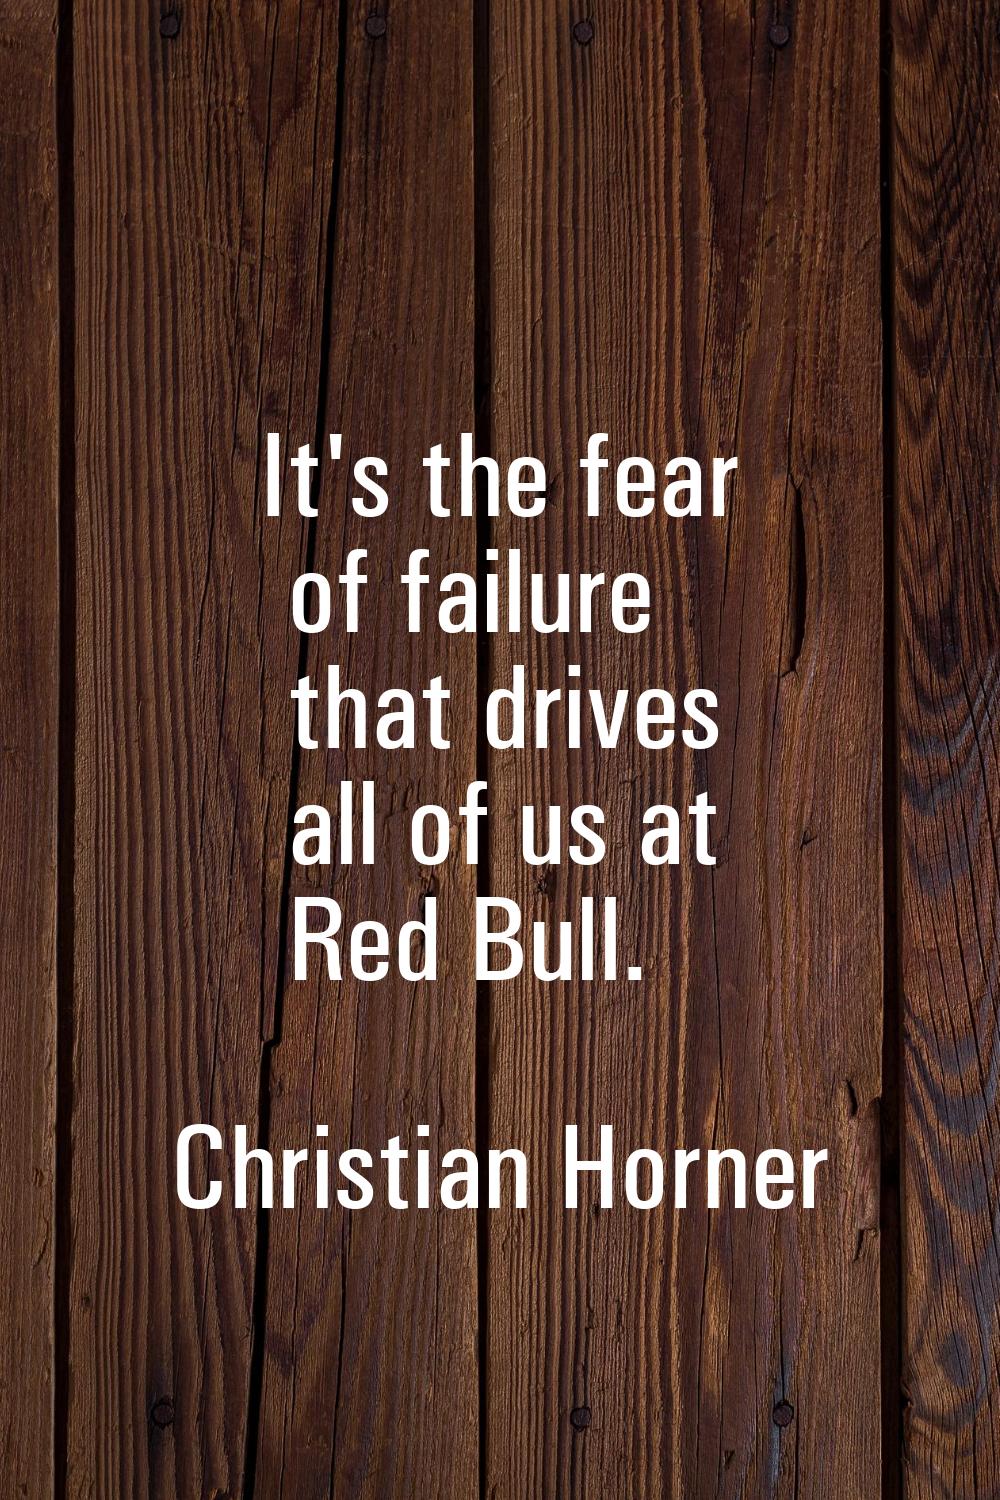 It's the fear of failure that drives all of us at Red Bull.